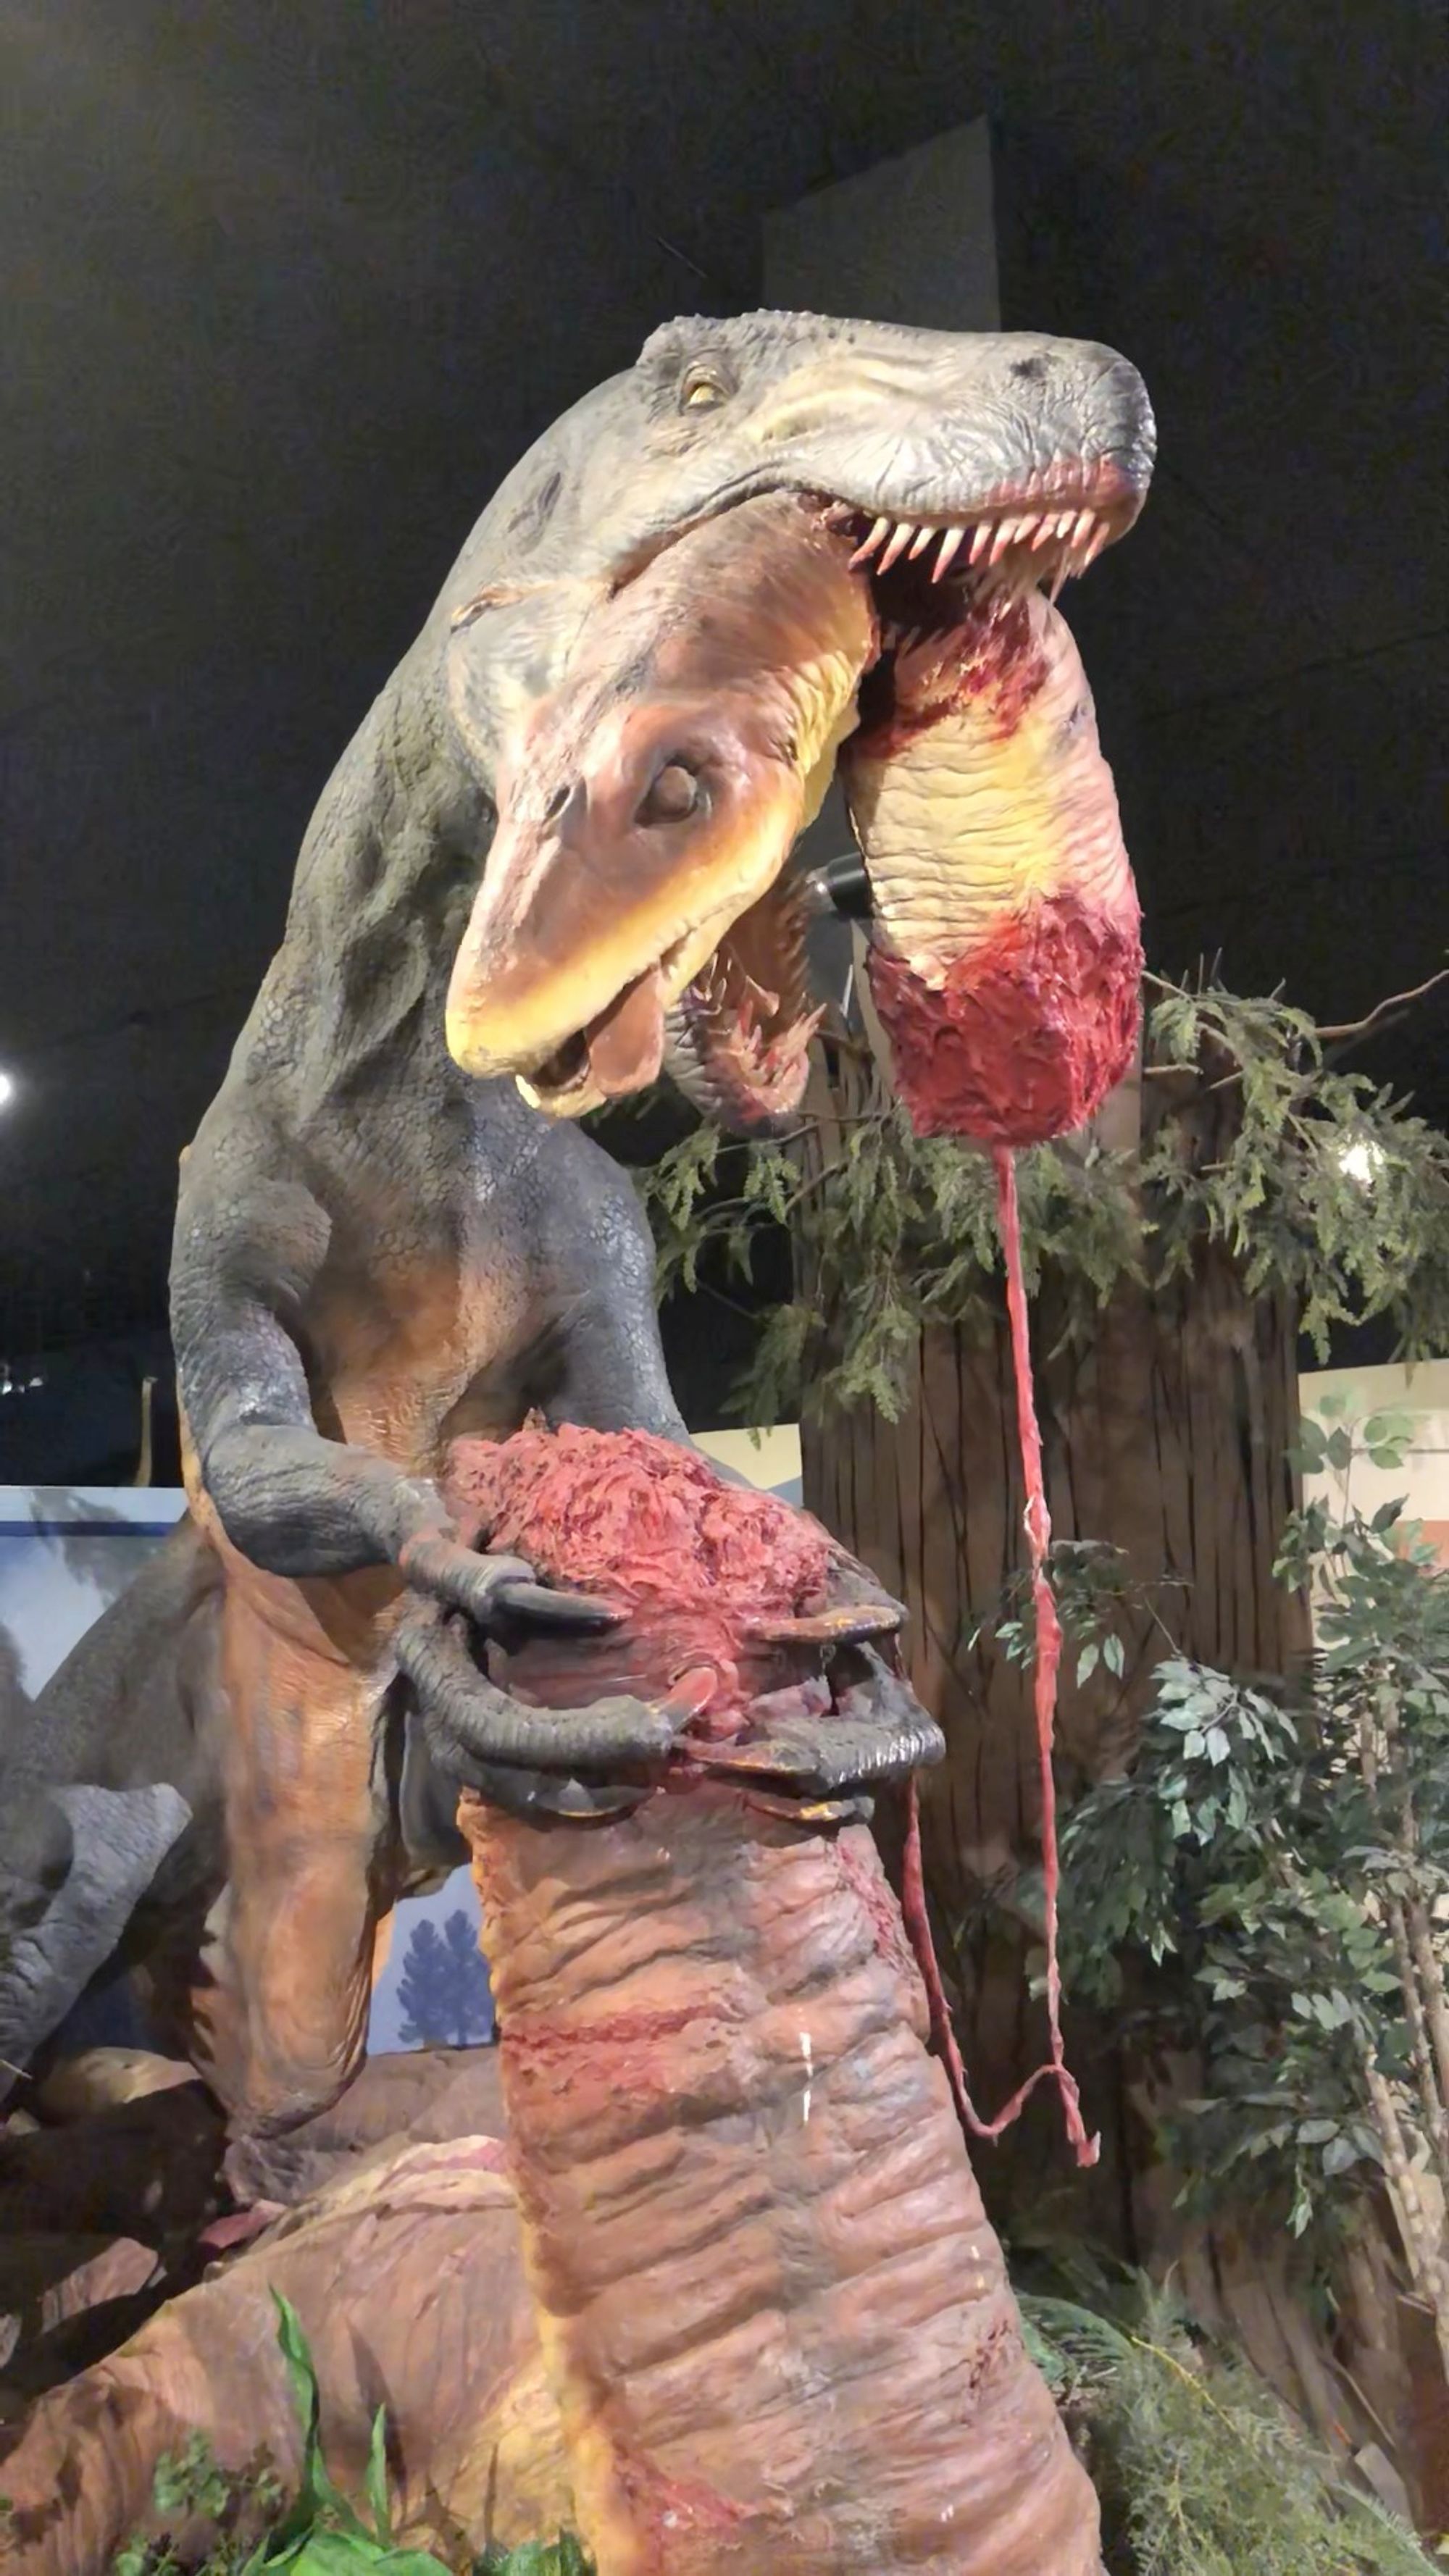 Animatronic dinosaurs at a museum - the carnivore has ripped the herbivore's head off.